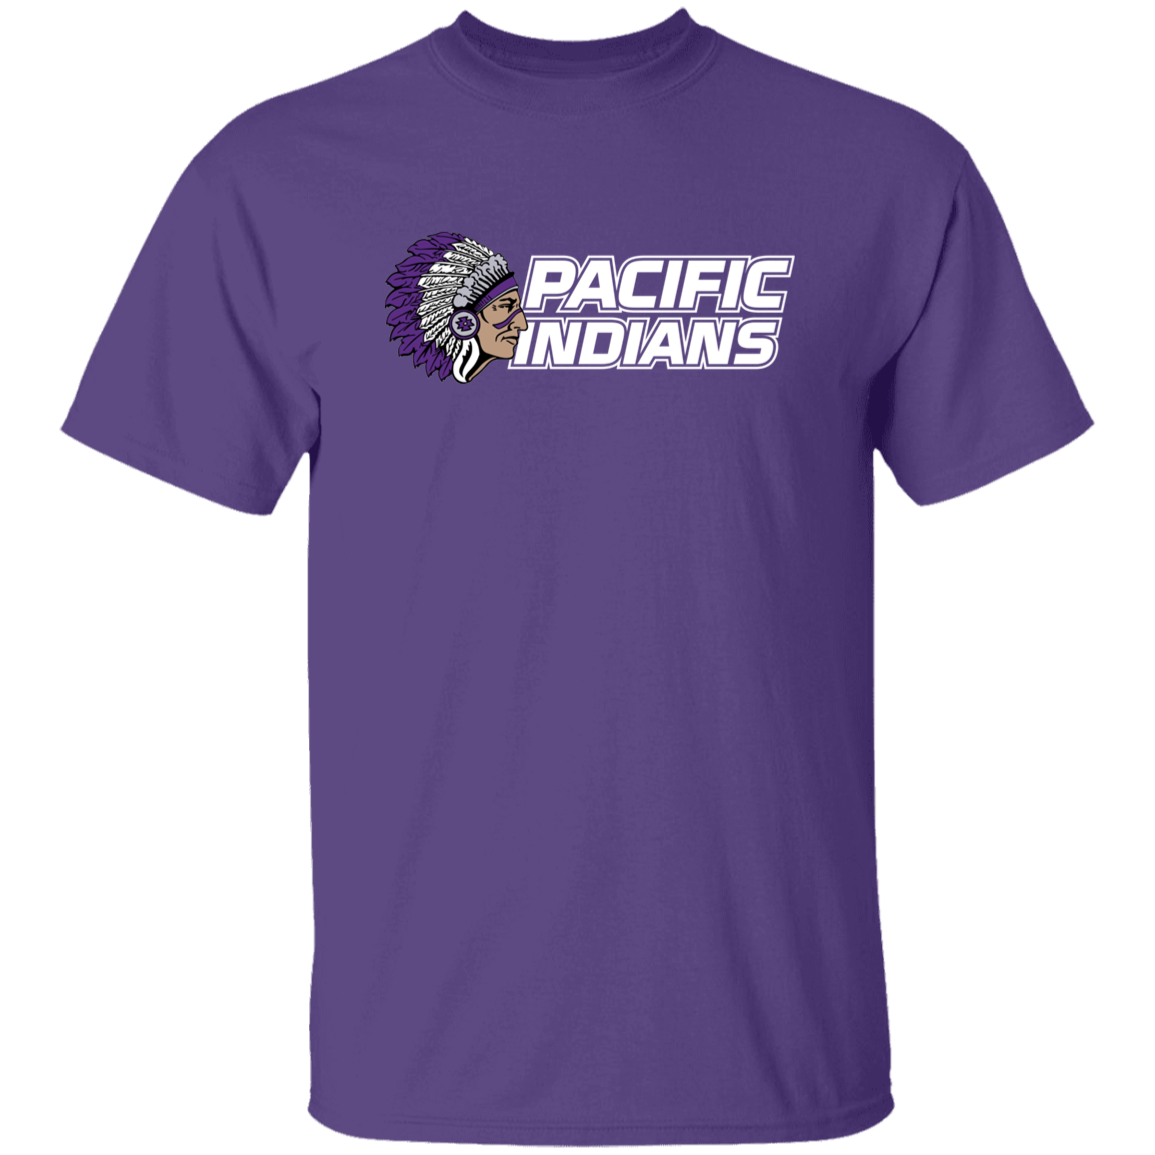 Pacific Indians Sports Club Design #2